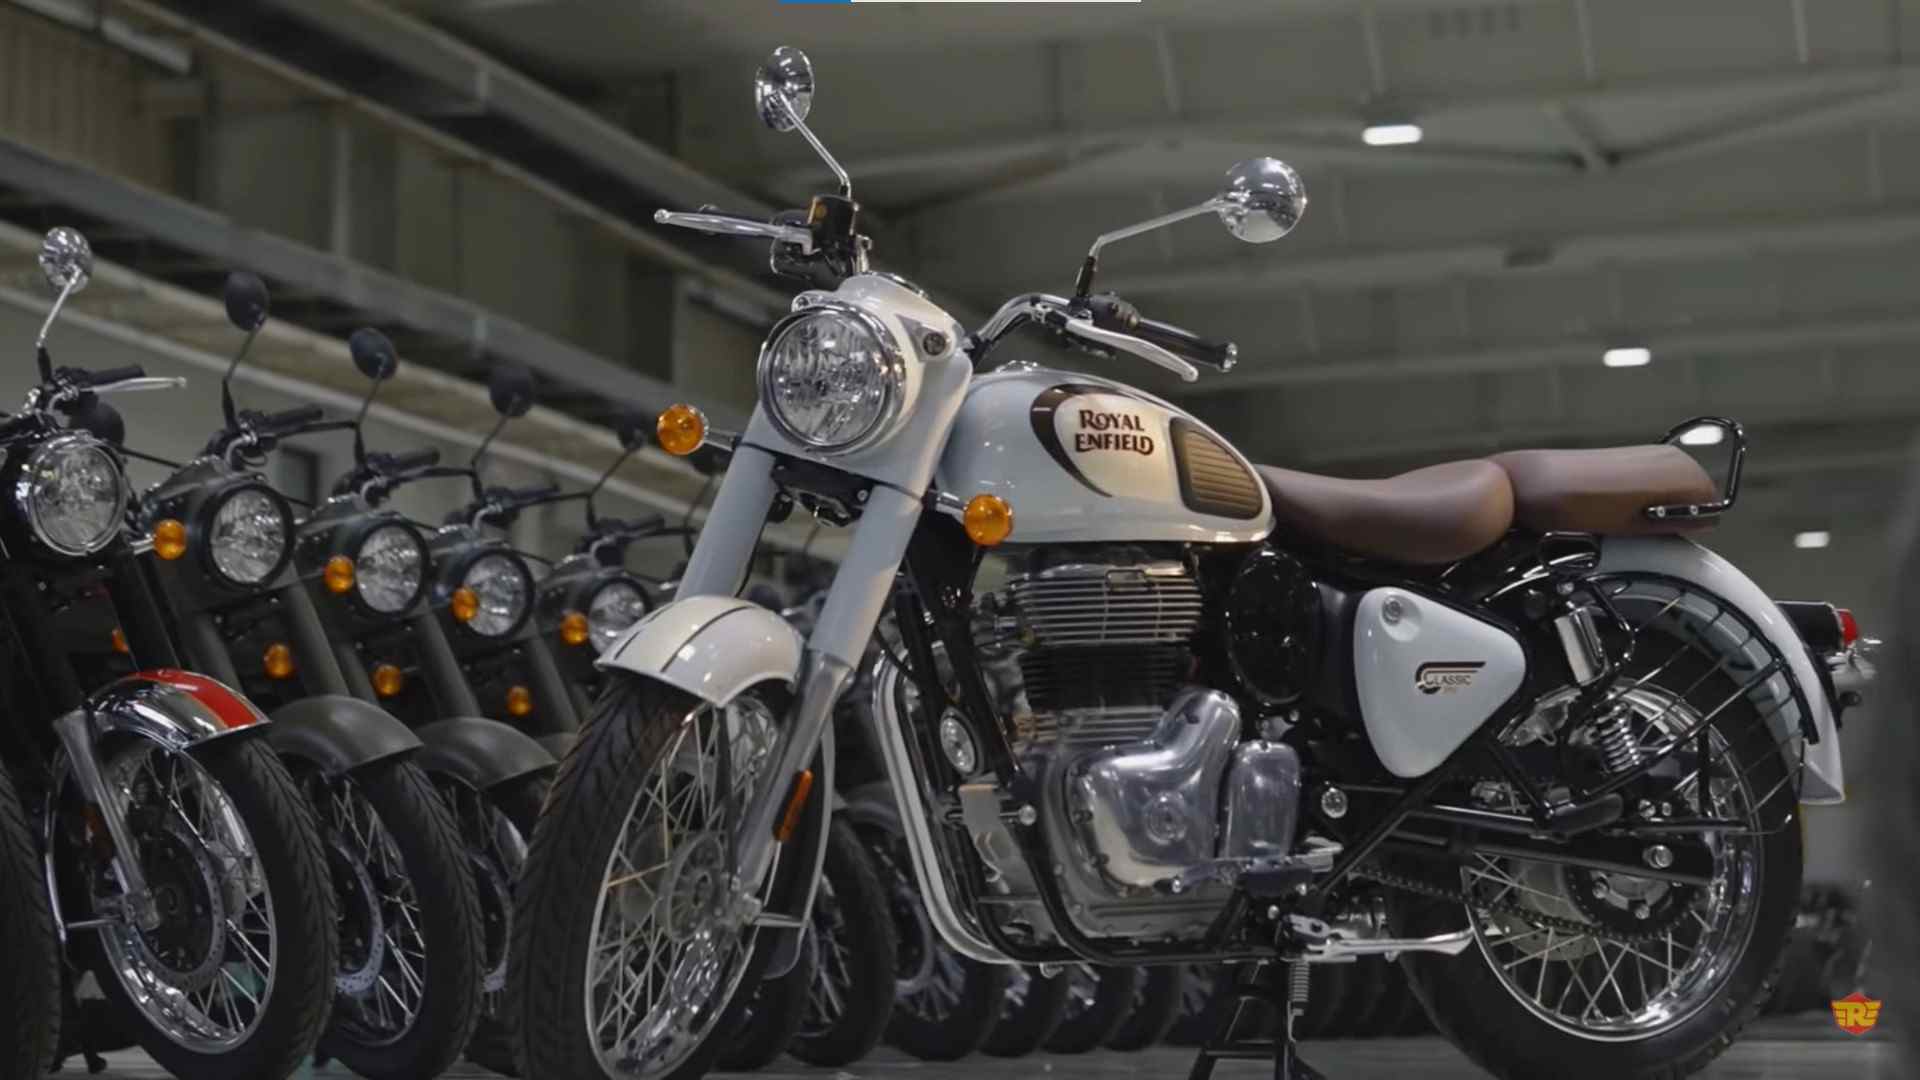 New Royal Enfield Bullet 350 is going to be launched today